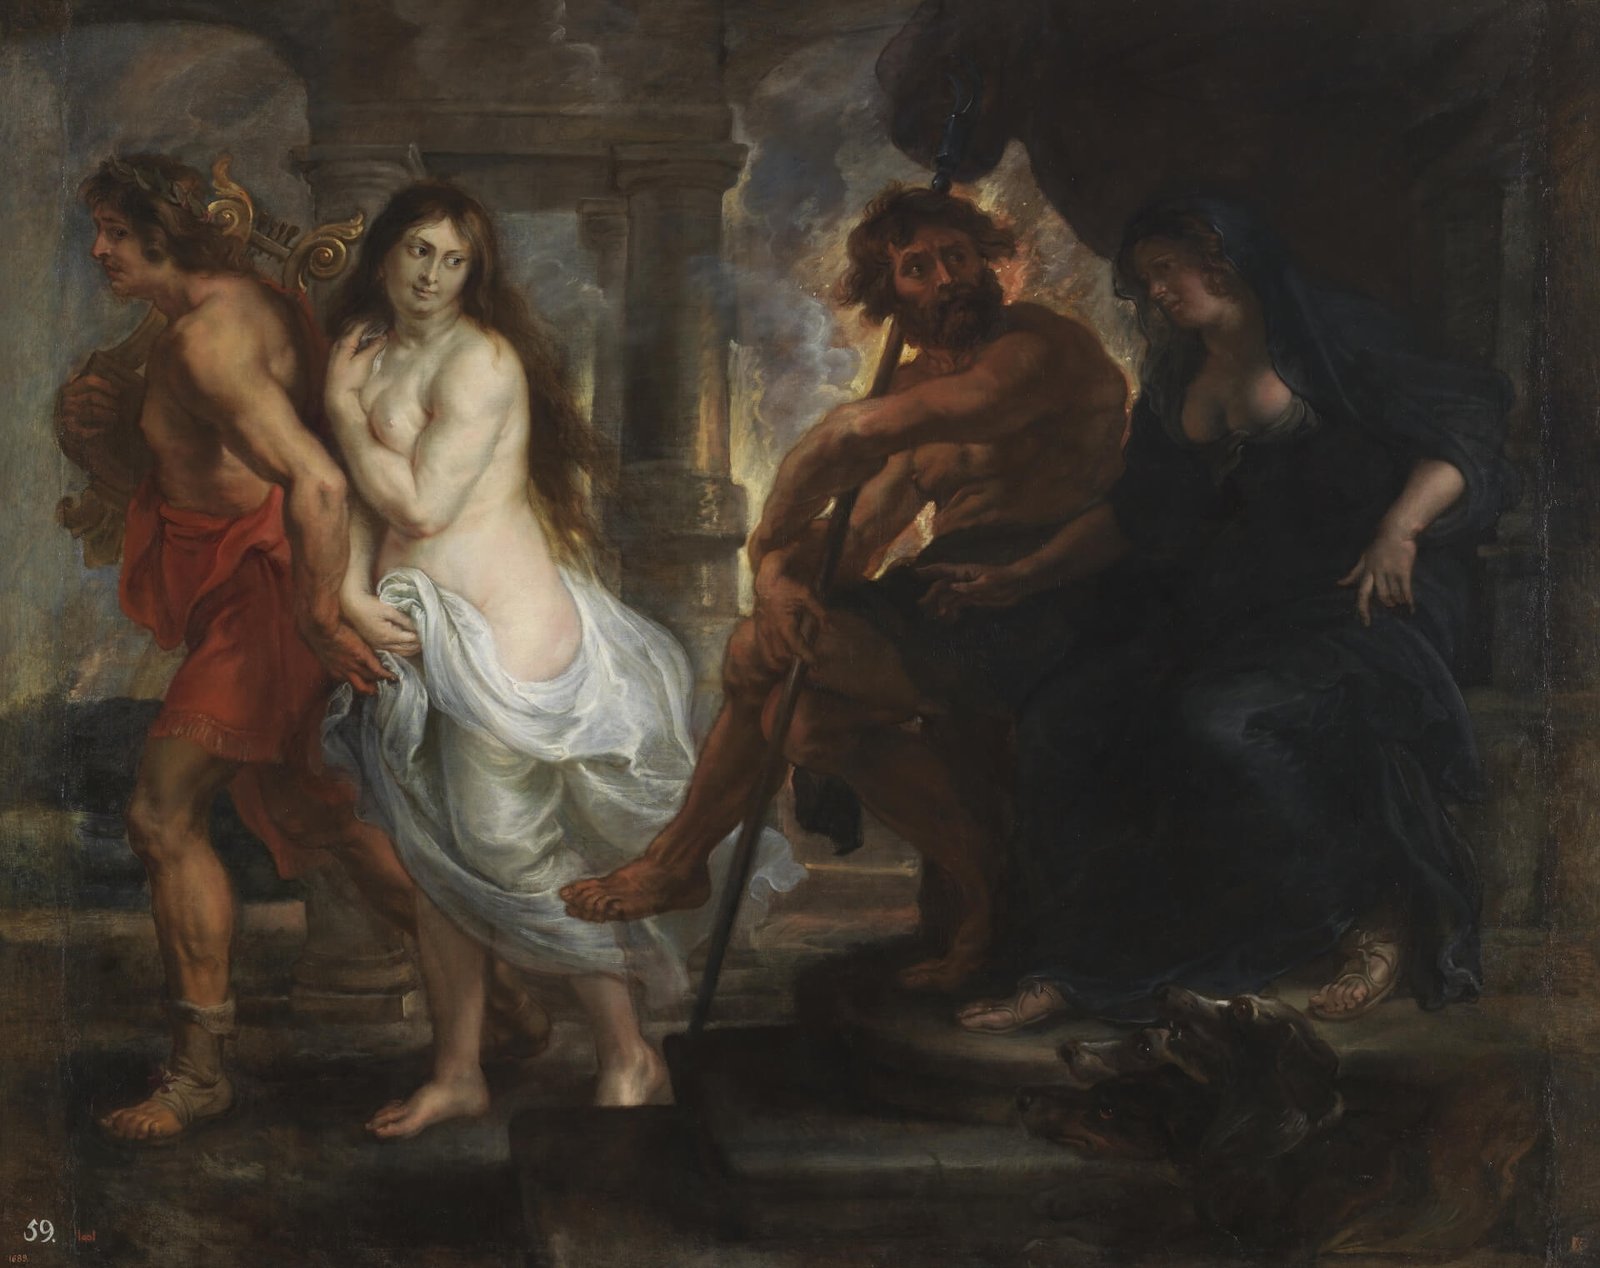 This painting represents Orpheus and Eurydice, leaving Hades and his spouse Persephone.